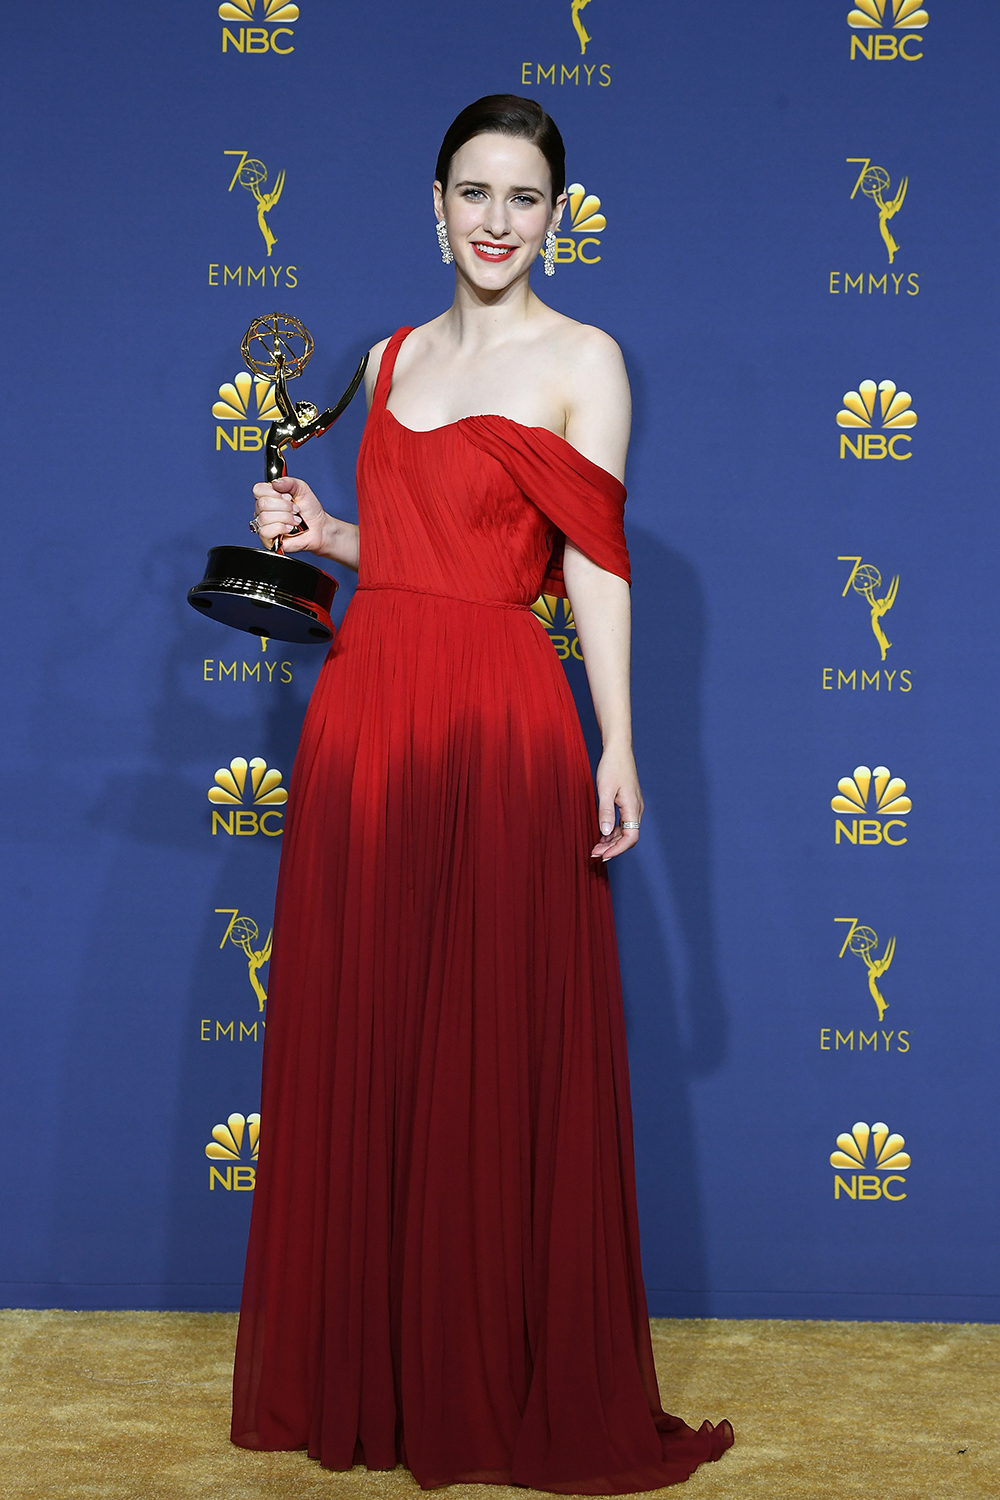 LOS ANGELES, CA - SEPTEMBER 17: Outstanding Actress in a Comedy Series Rachel Brosnahan poses in the press room during the 70th Emmy Awards at Microsoft Theater on September 17, 2018 in Los Angeles, California. (Photo by Steve Granitz/WireImage)